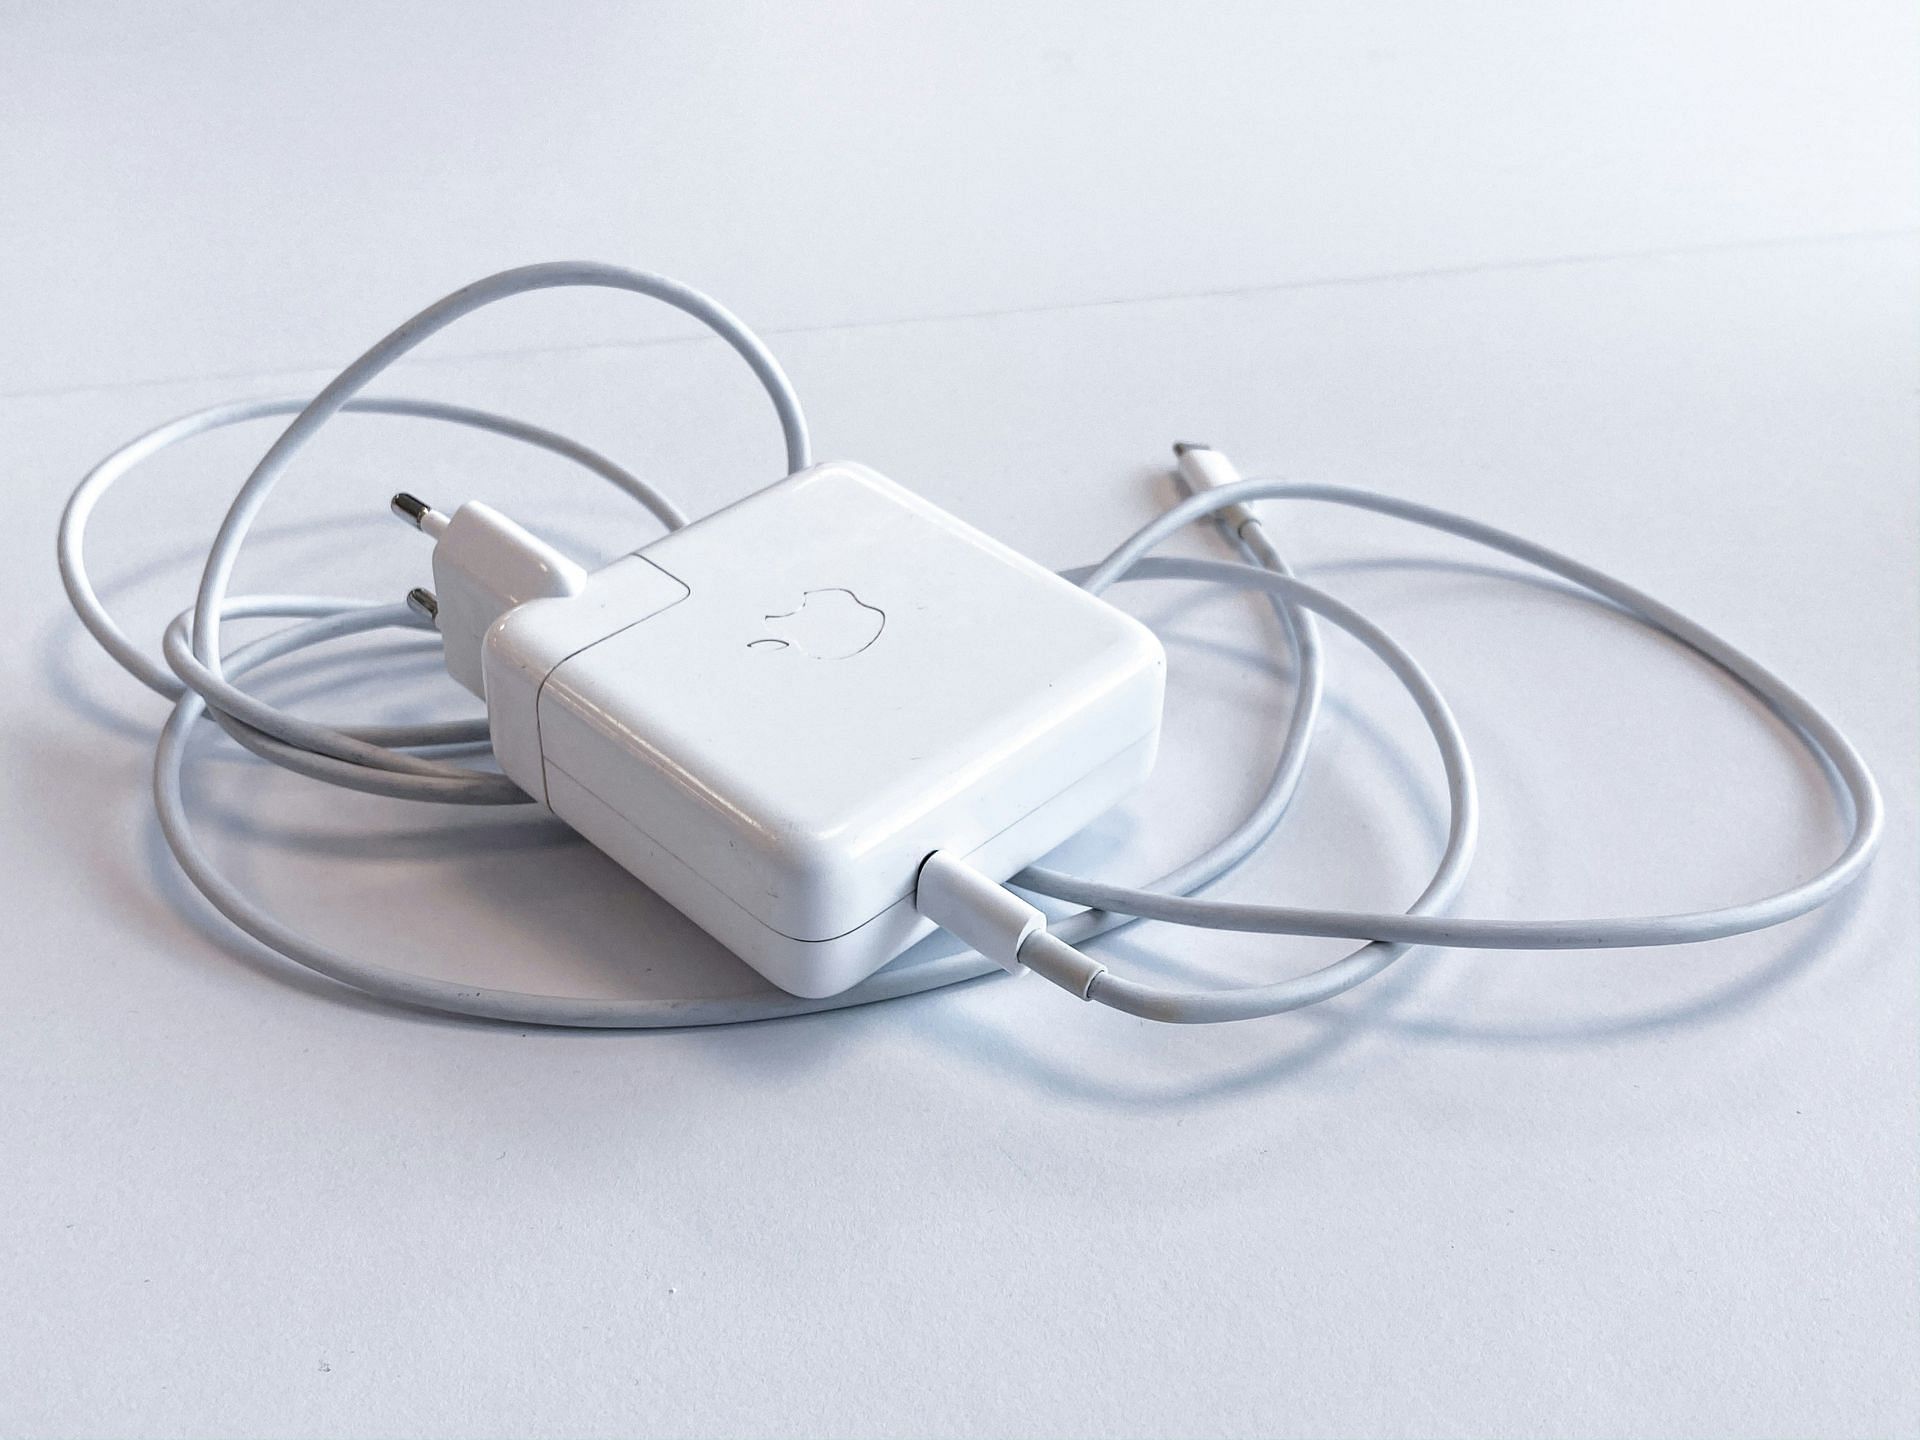 Carrying a charger everywhere can be a sign of low battery anxiety (Image by Homemade Media/Unsplash)